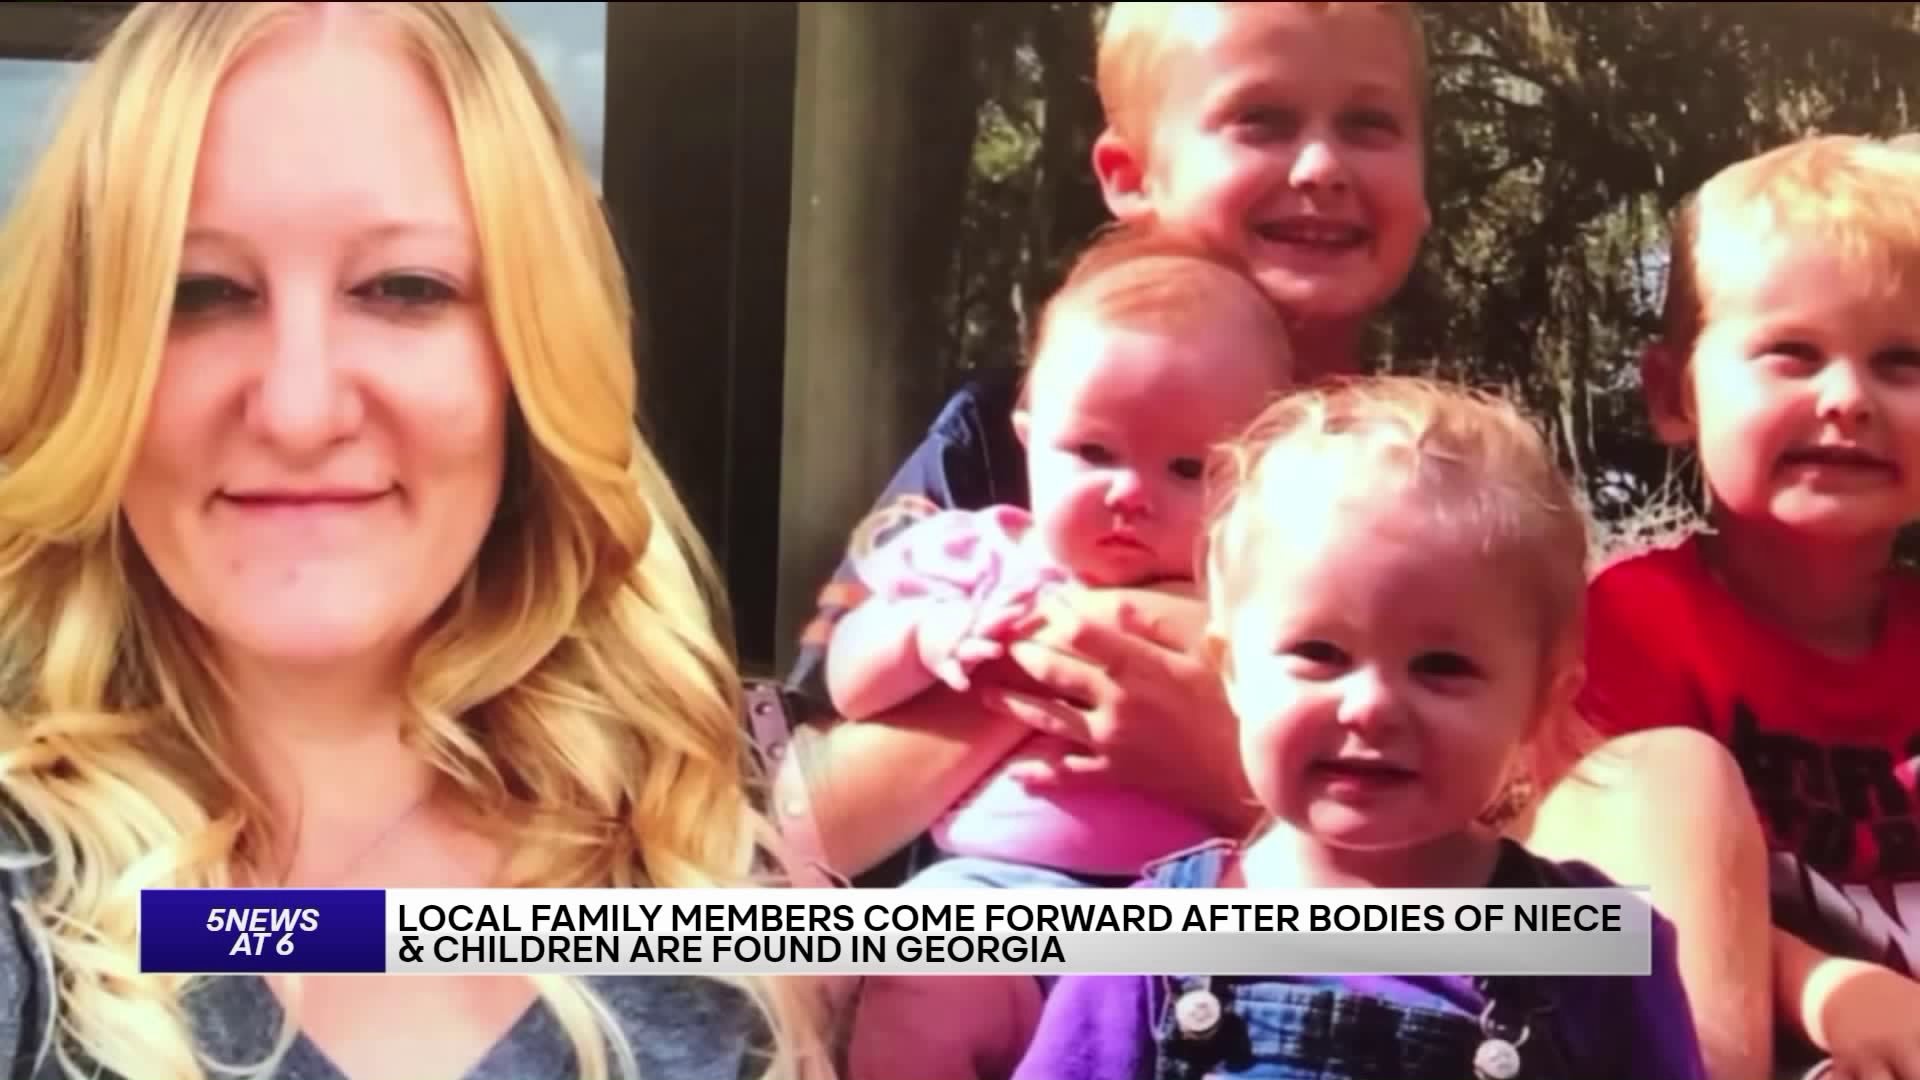 Missing Florida Woman And Her Children Found Dead, Arkansas Family Members Speak Out